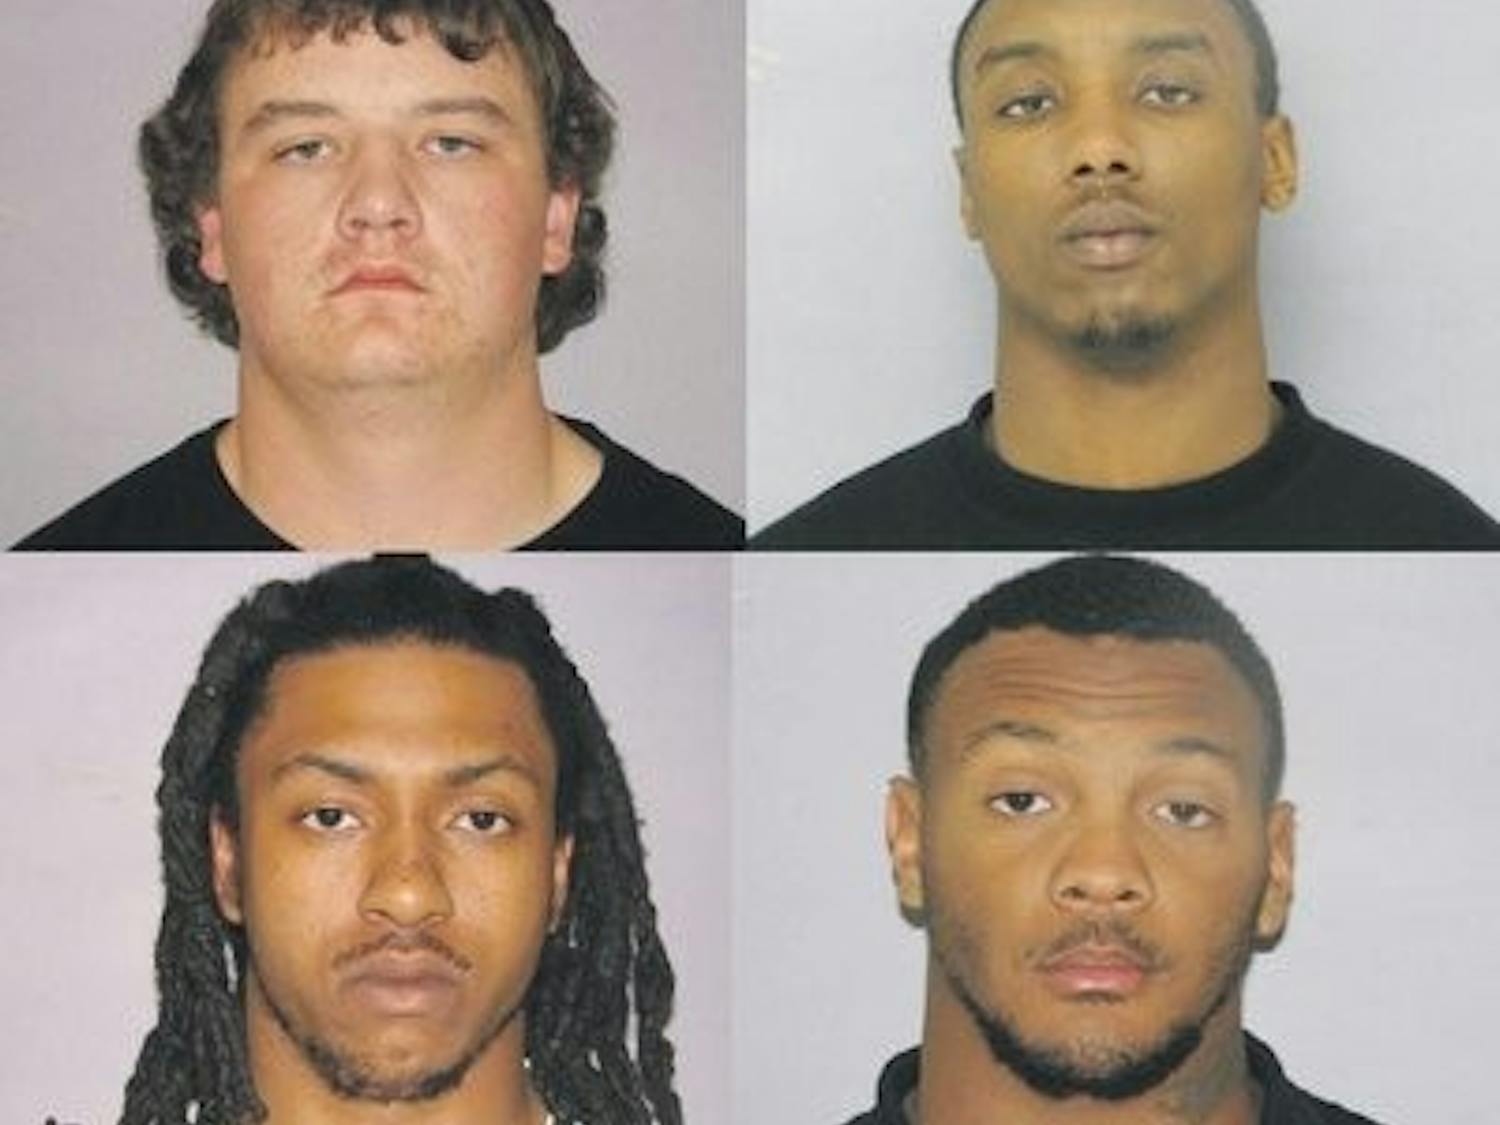 Four Auburn players, (clockwise, from top left) Dakota Mosley, Antonio Goodwin, Shaun Kitchens and Antonio Goodwin were arrested for first-degree robbery of a mobile home. (Contributed)